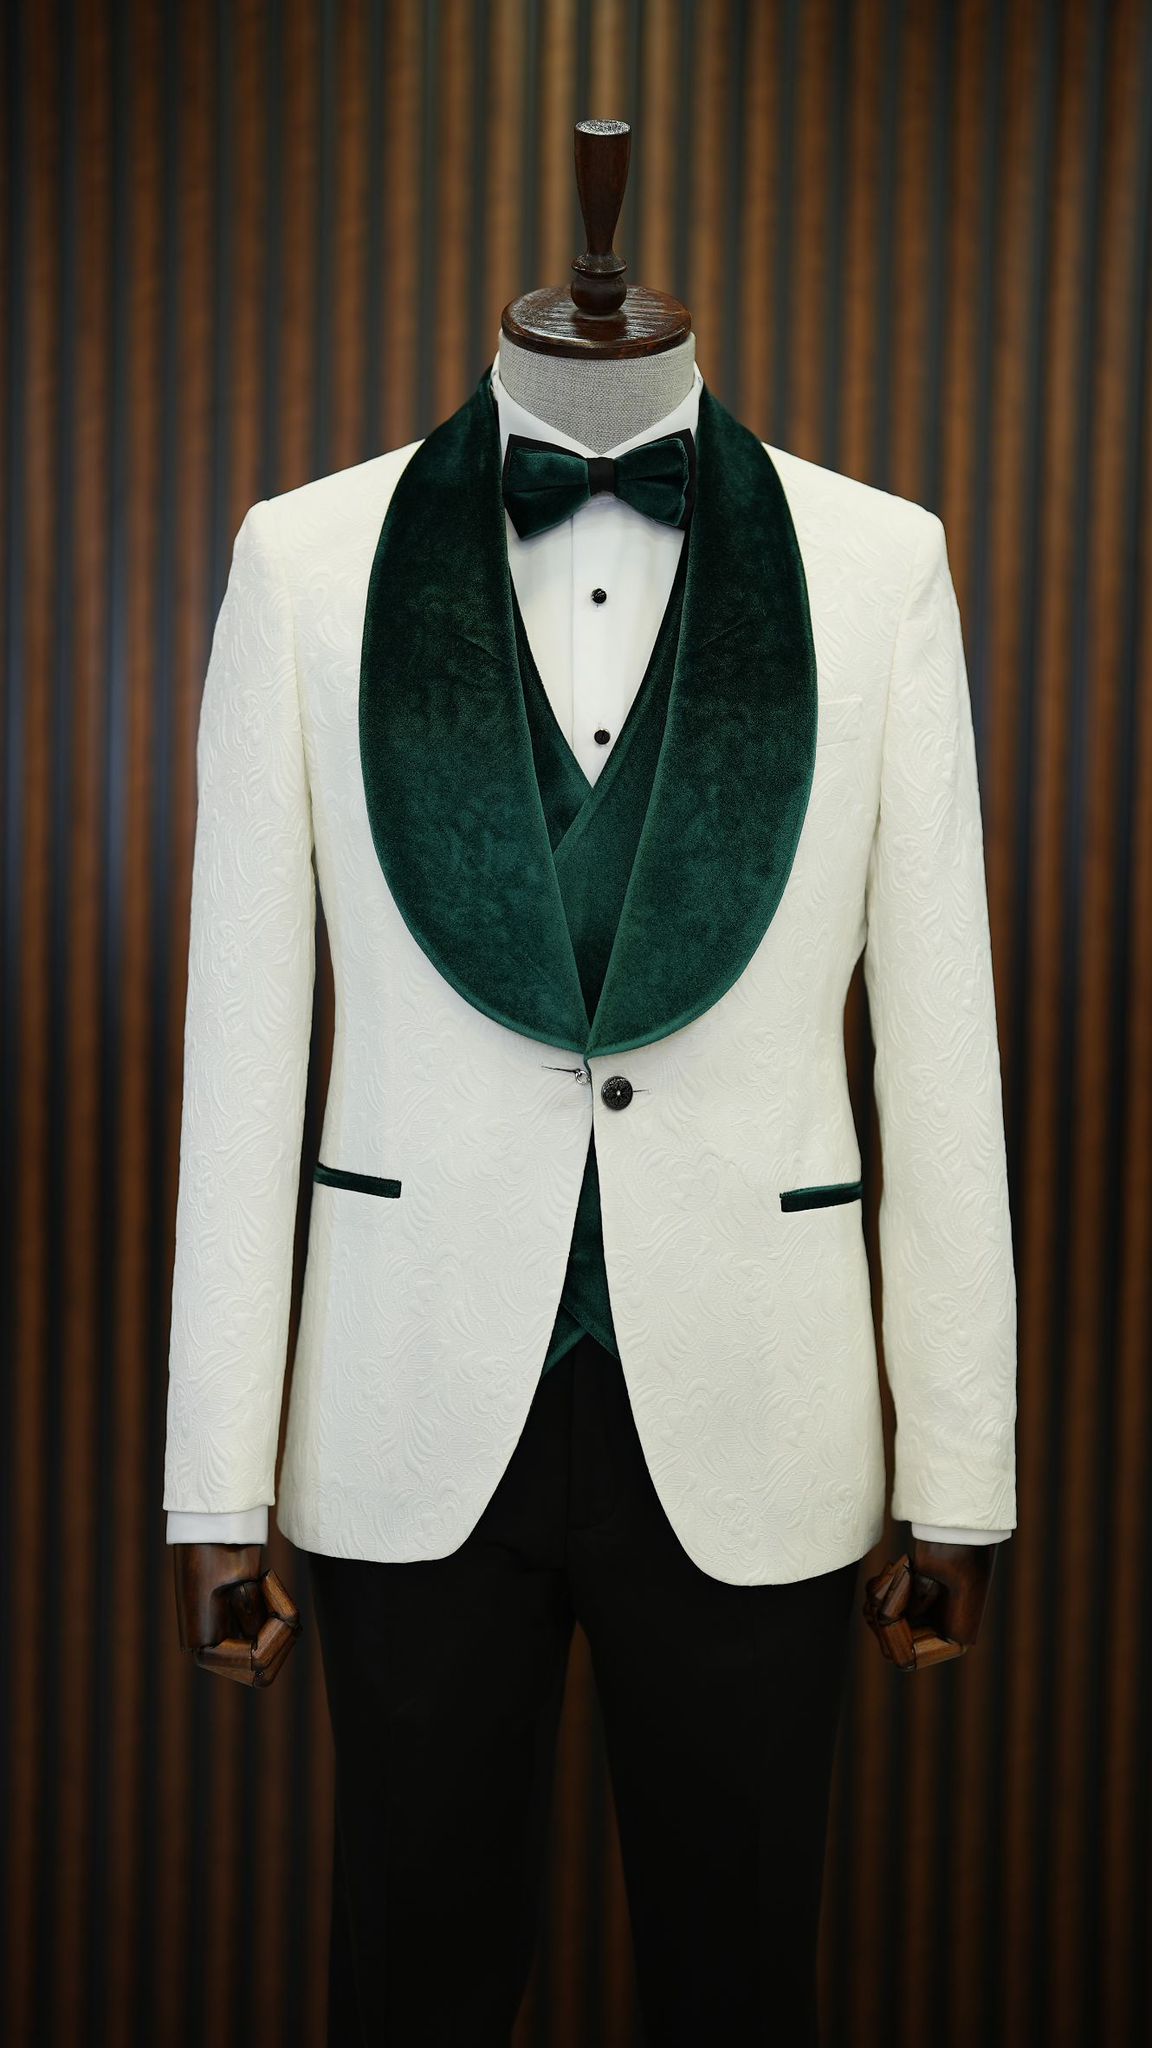 A  Green and White Tuxedo Suit on display.